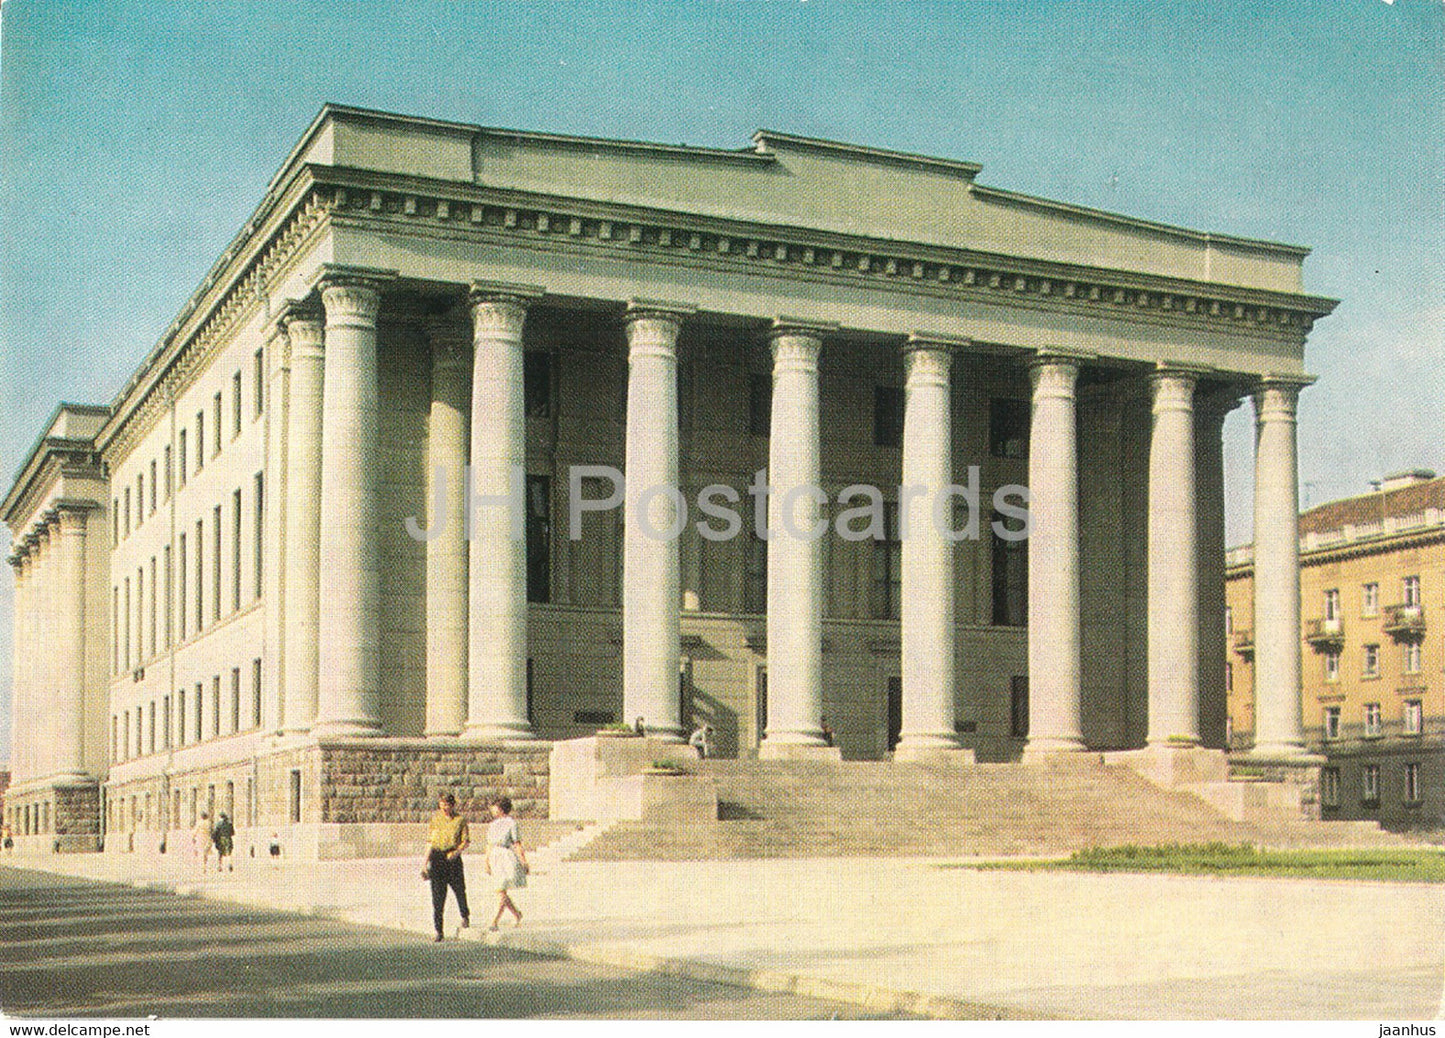 Vilnius - State Library - postal stationery - 1972 - Lithuania USSR - unused - JH Postcards